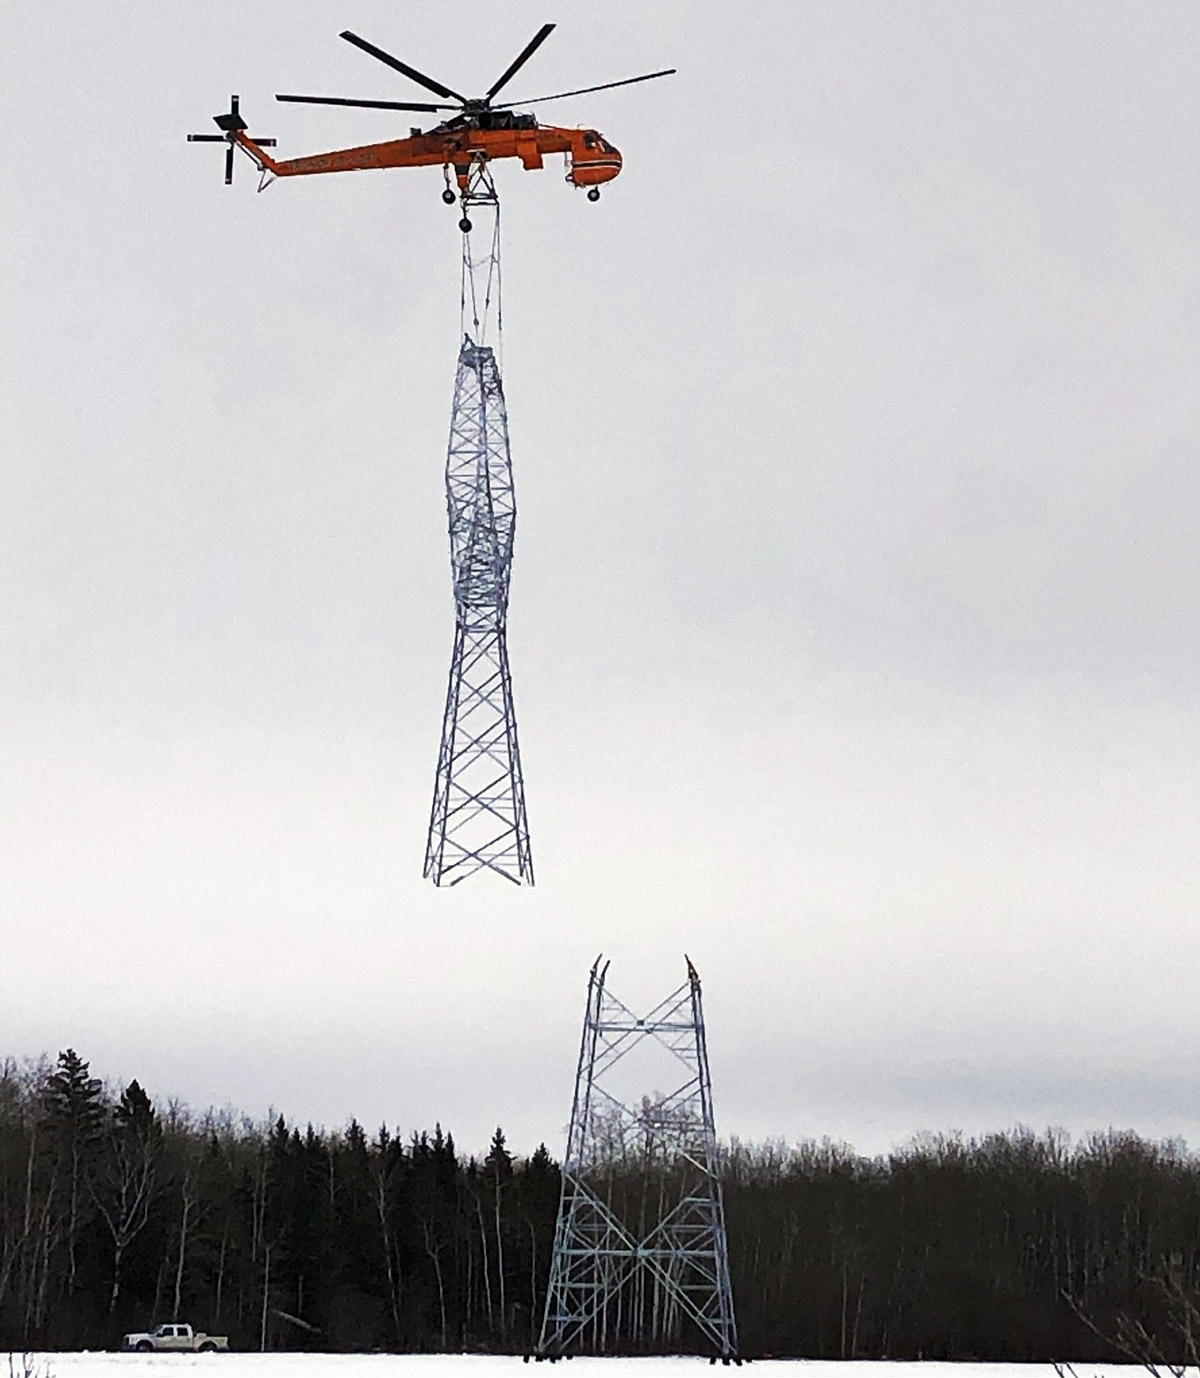 Tower assembly using a helicopter.